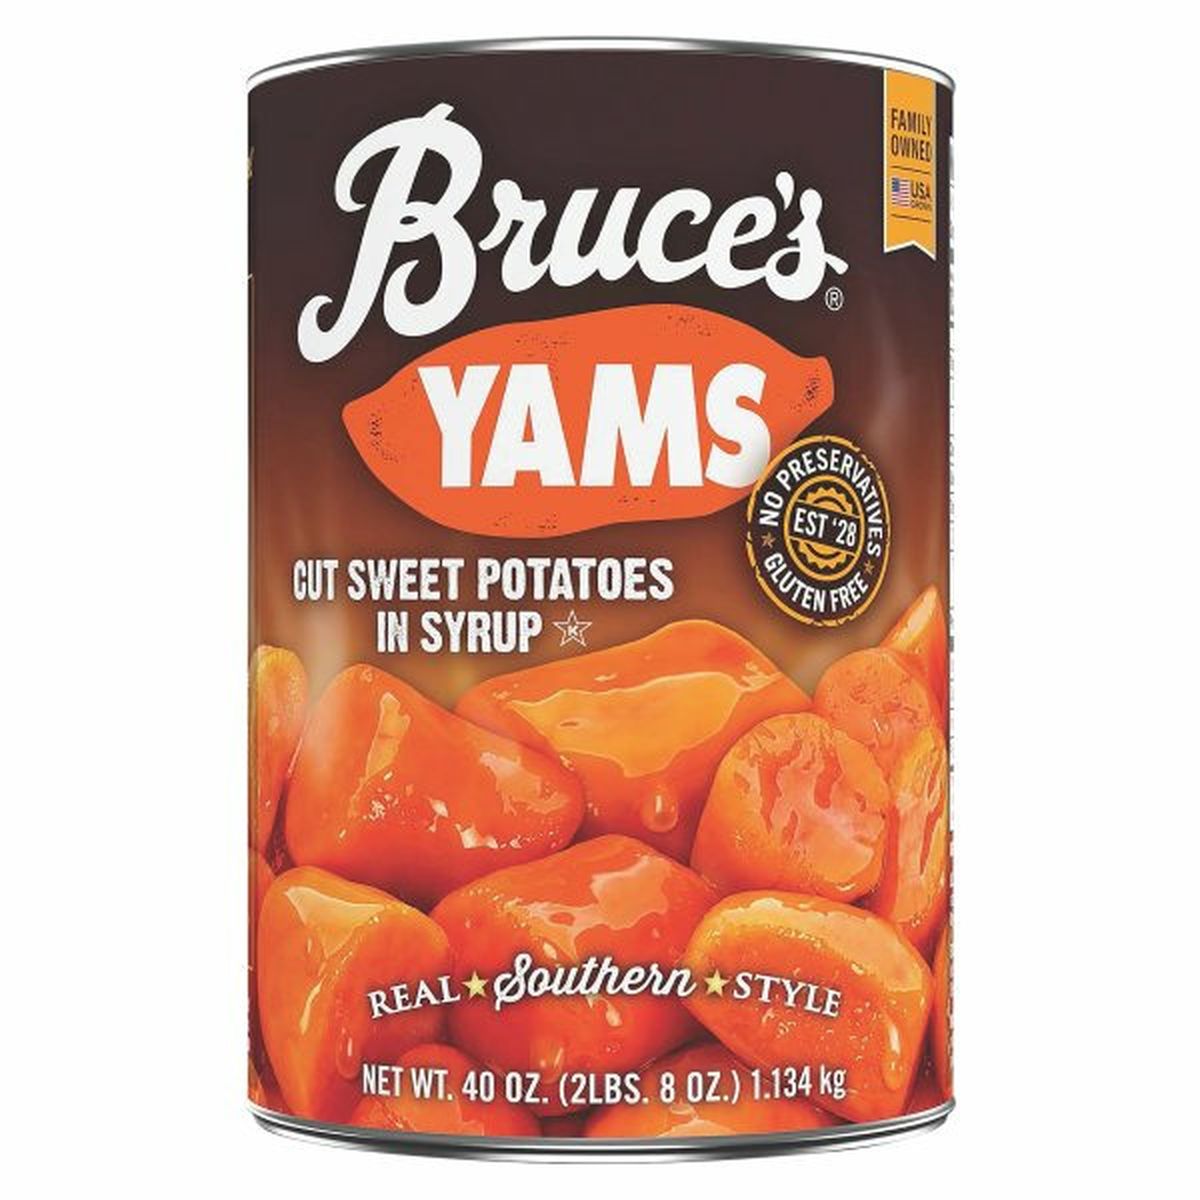 Calories in Bruce's Yams Sweet Potatoes, in Syrup, Cut, Yams